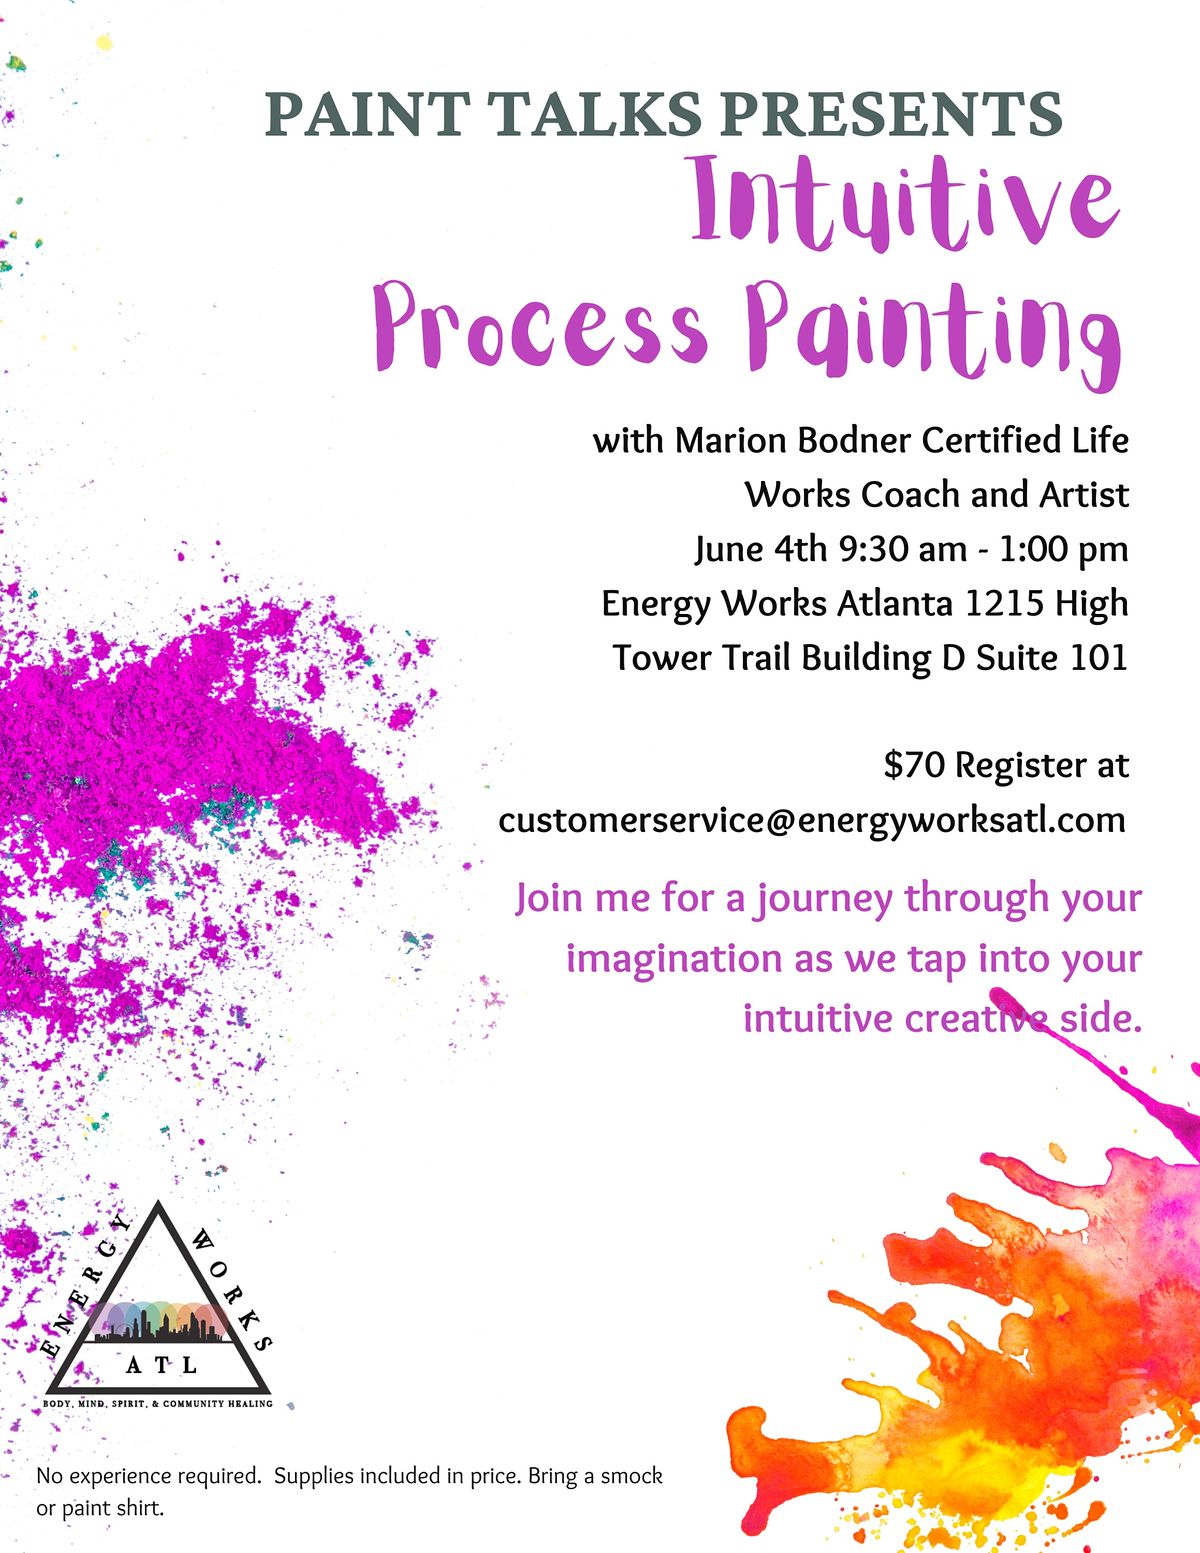 INTUITIVE PROCESS PAINTING WORKSHOP - with Marion Bodner from Paint Talks